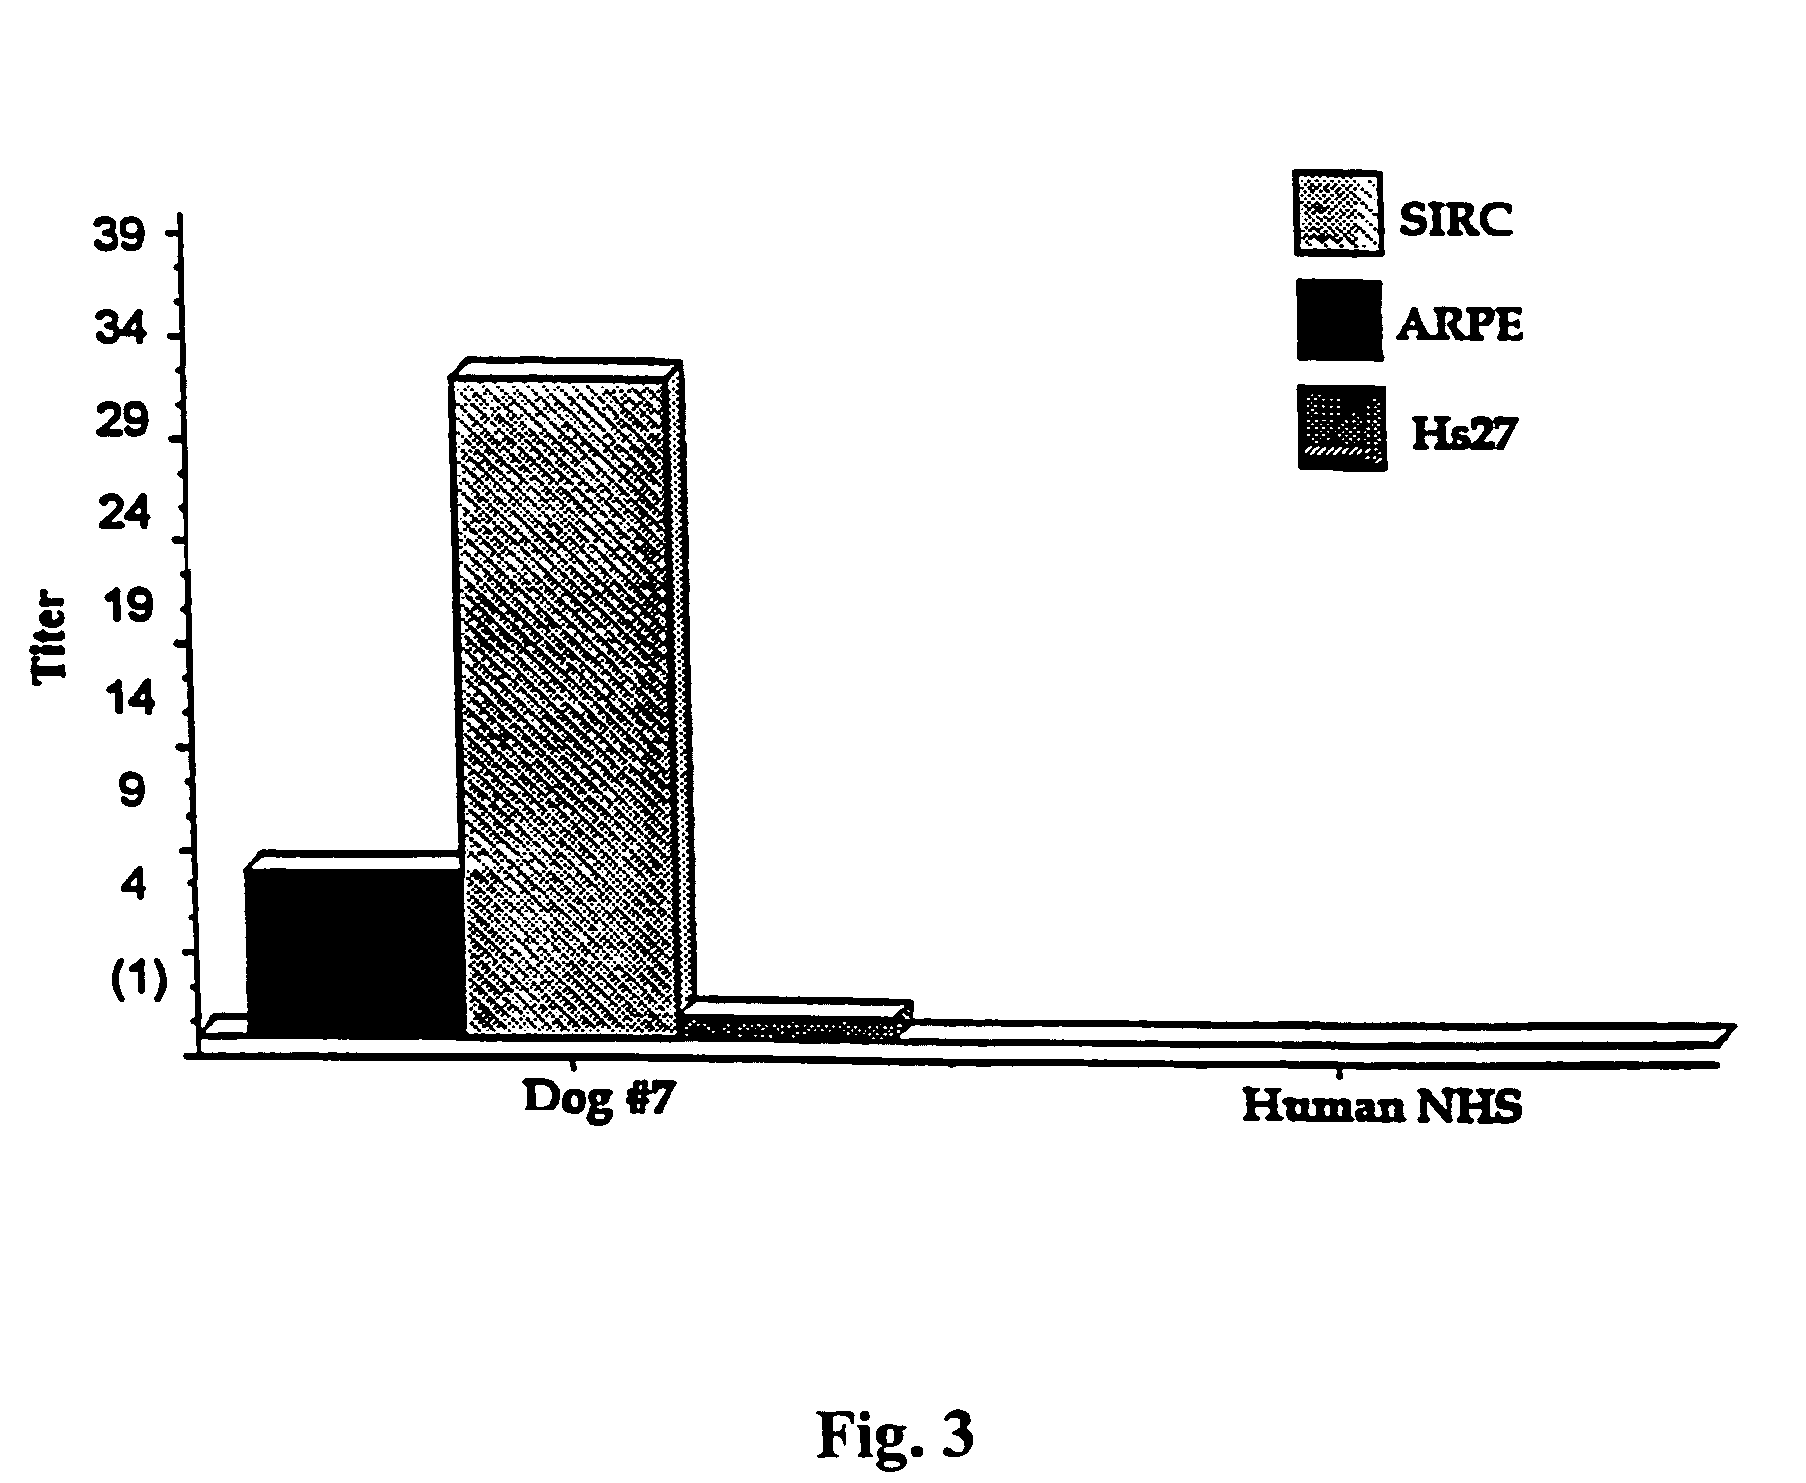 ARPE-19 as a platform cell line for encapsulated cell-based delivery